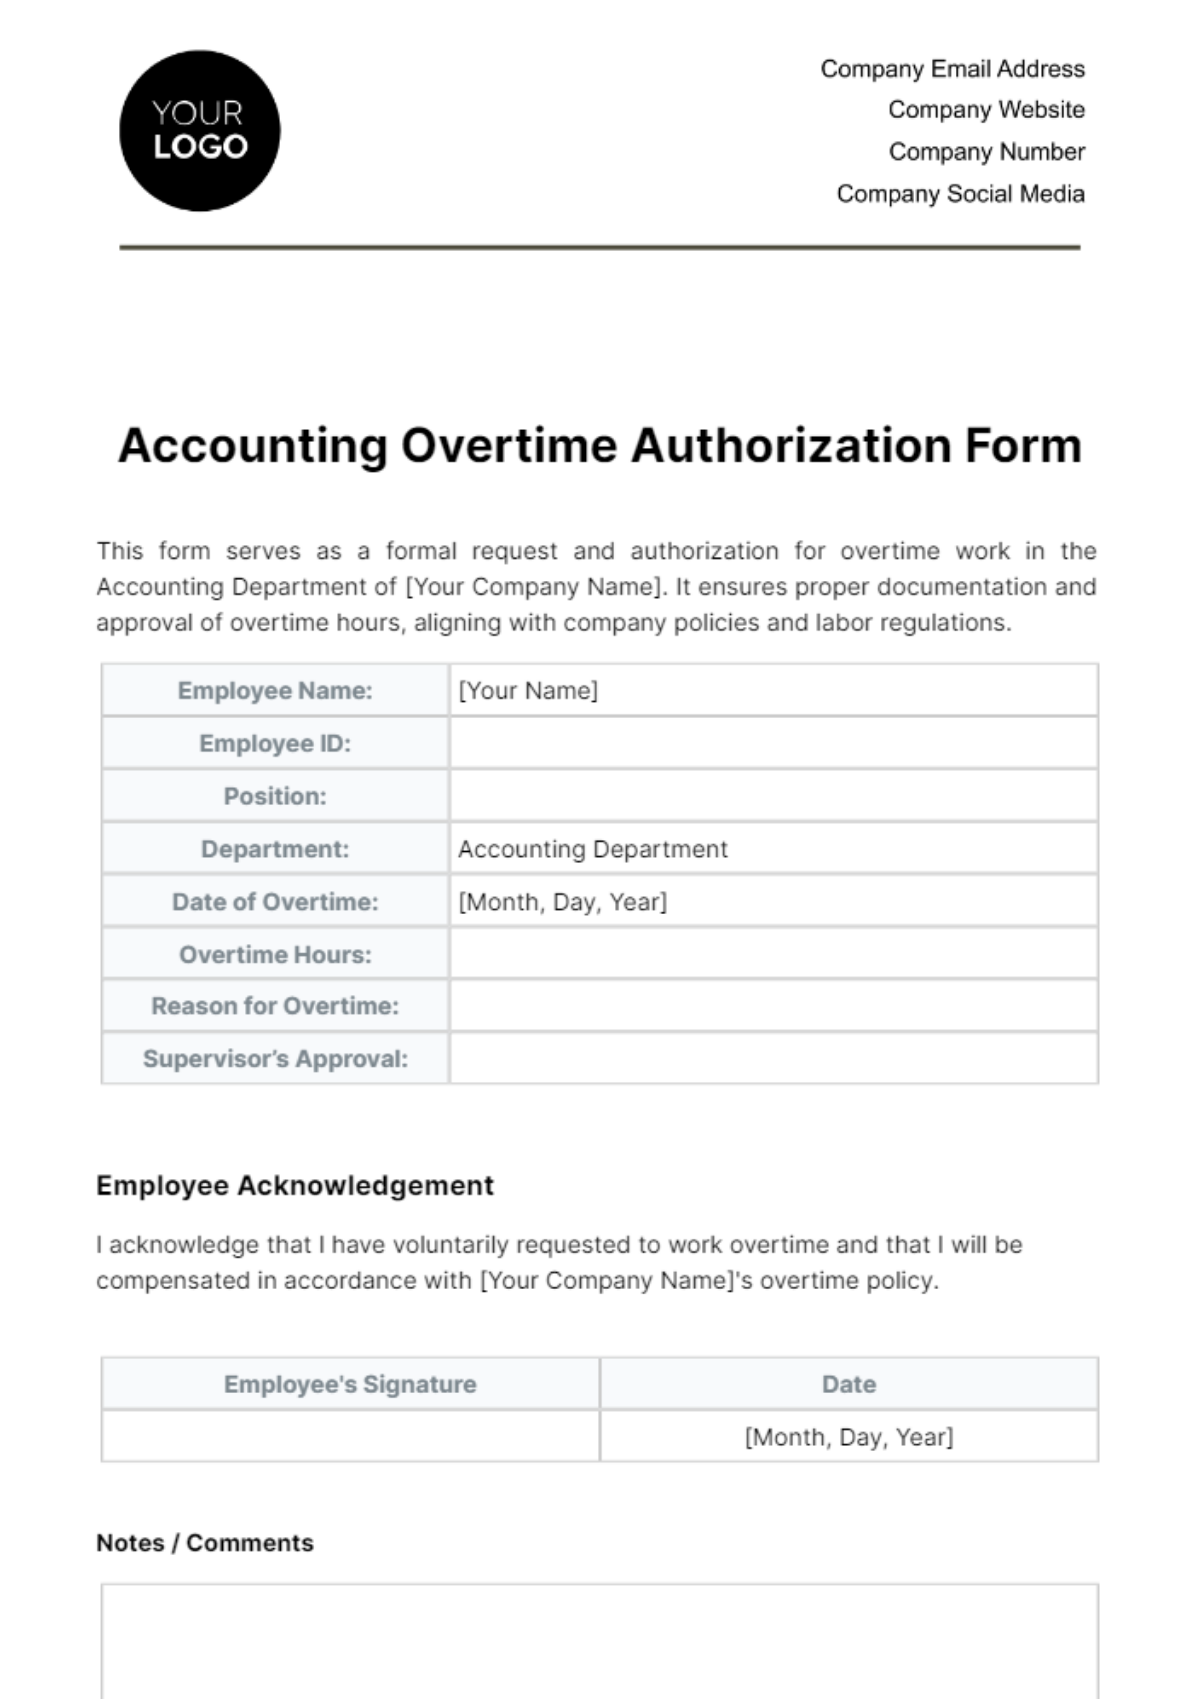 Accounting Overtime Authorization Form Template